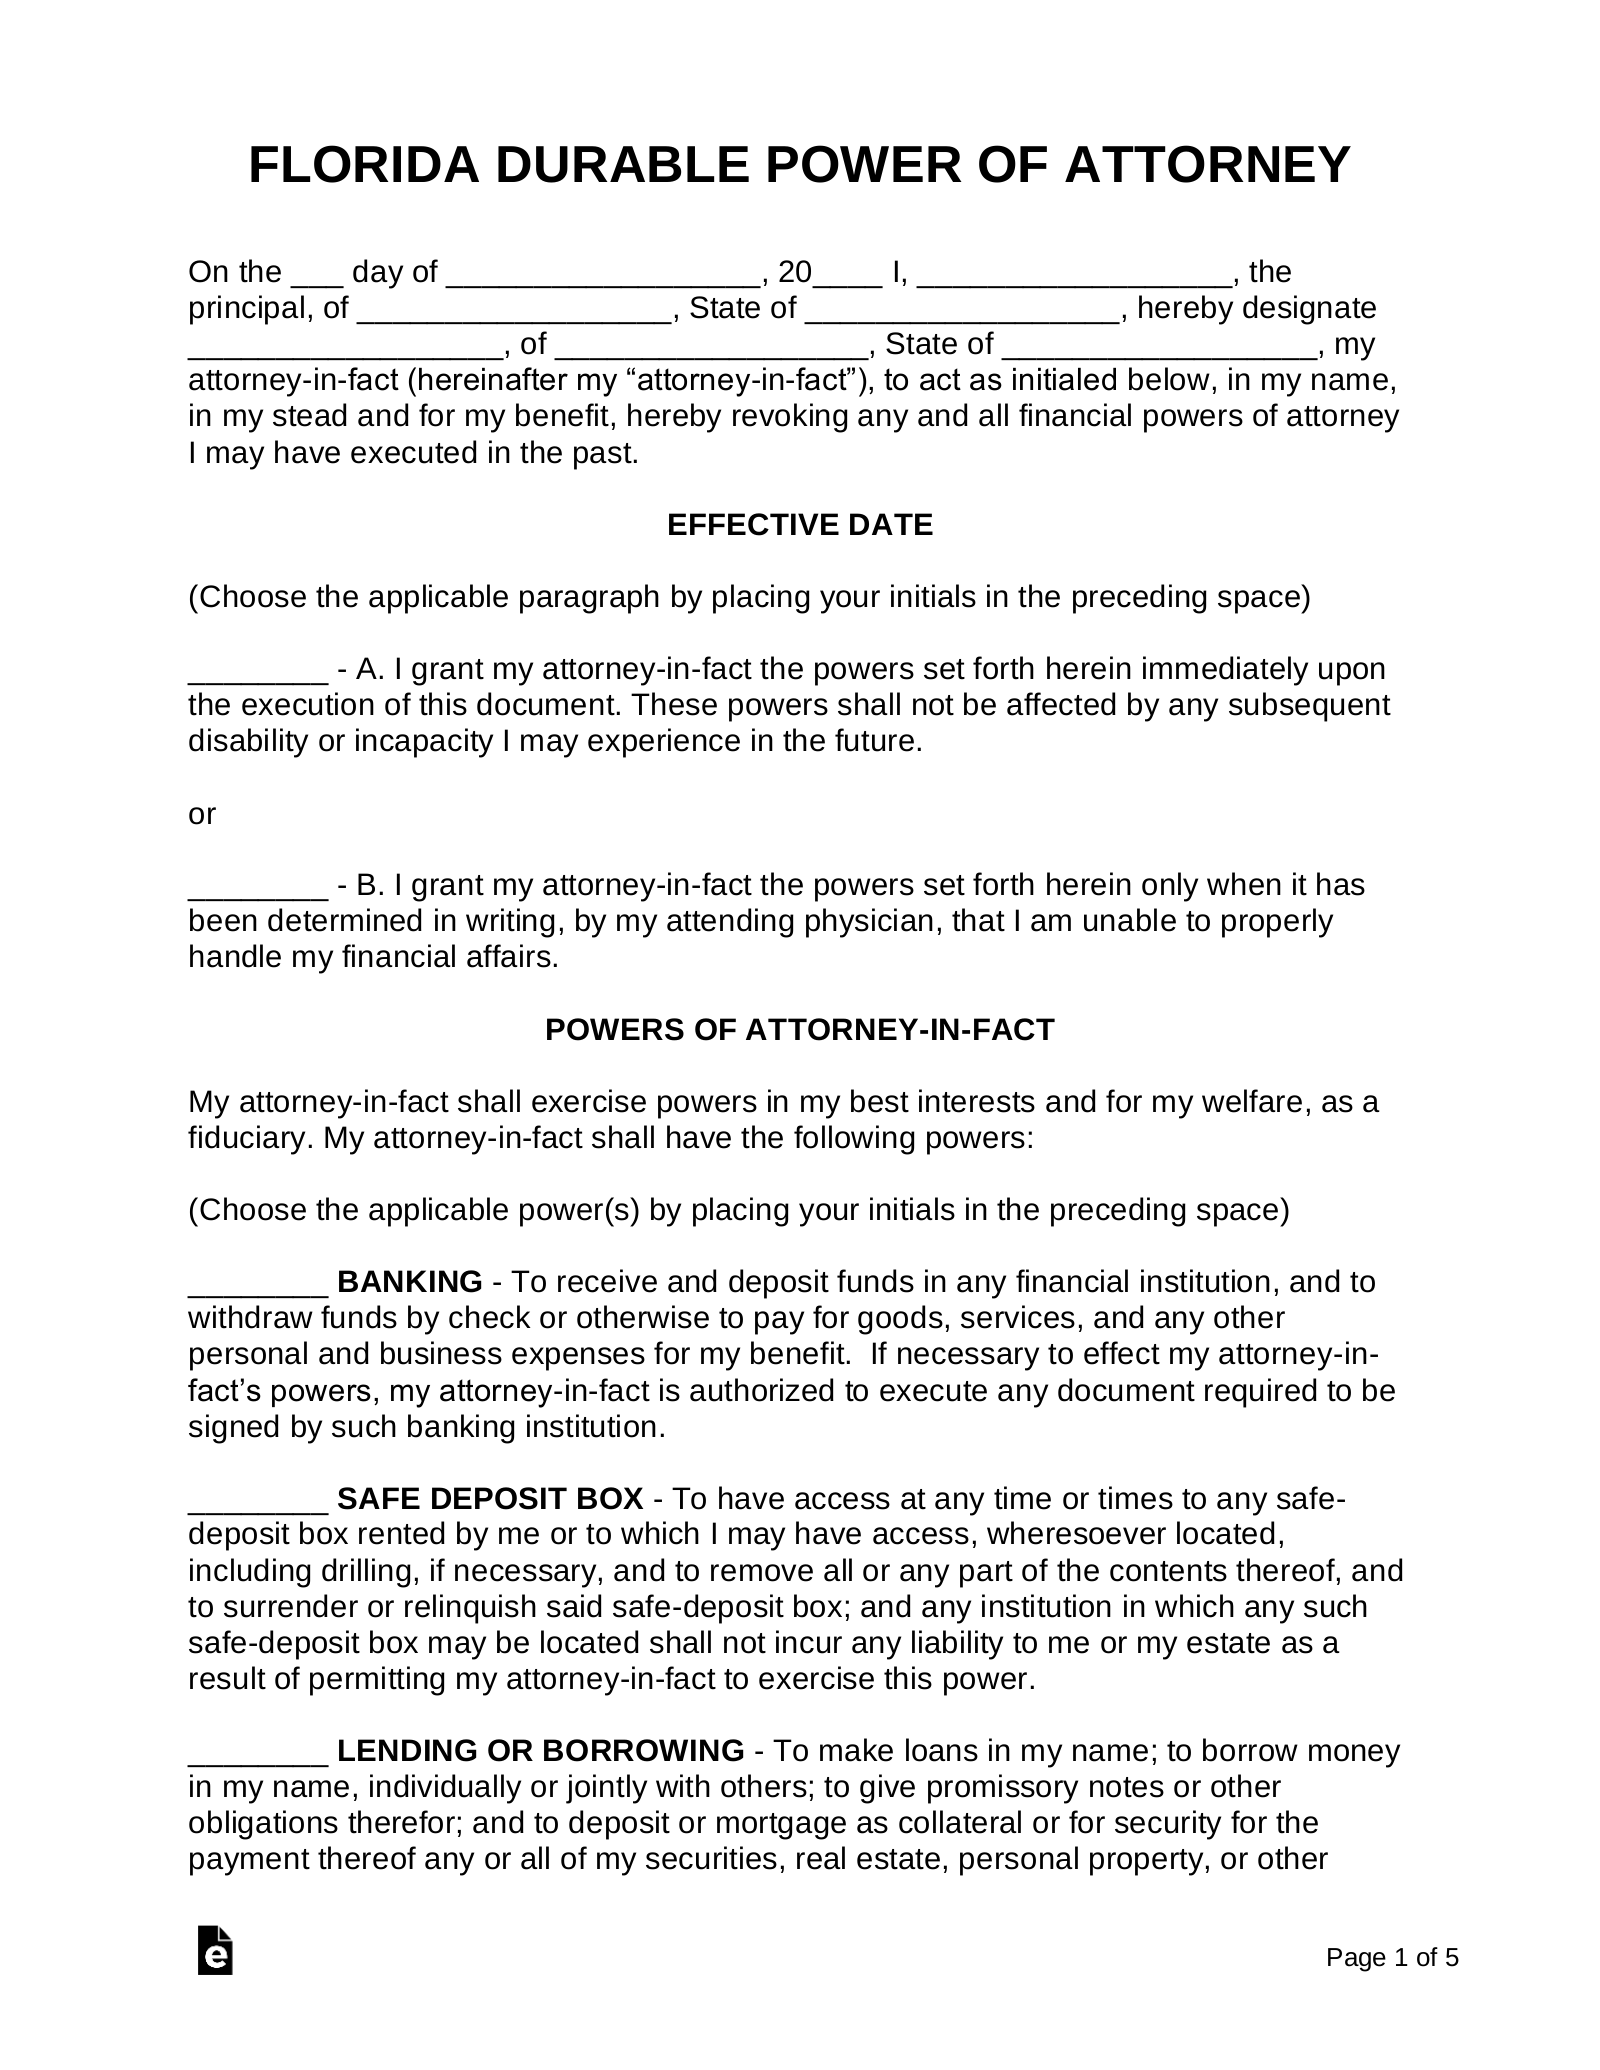 Free Florida Durable Statutory Power Of Attorney Form 